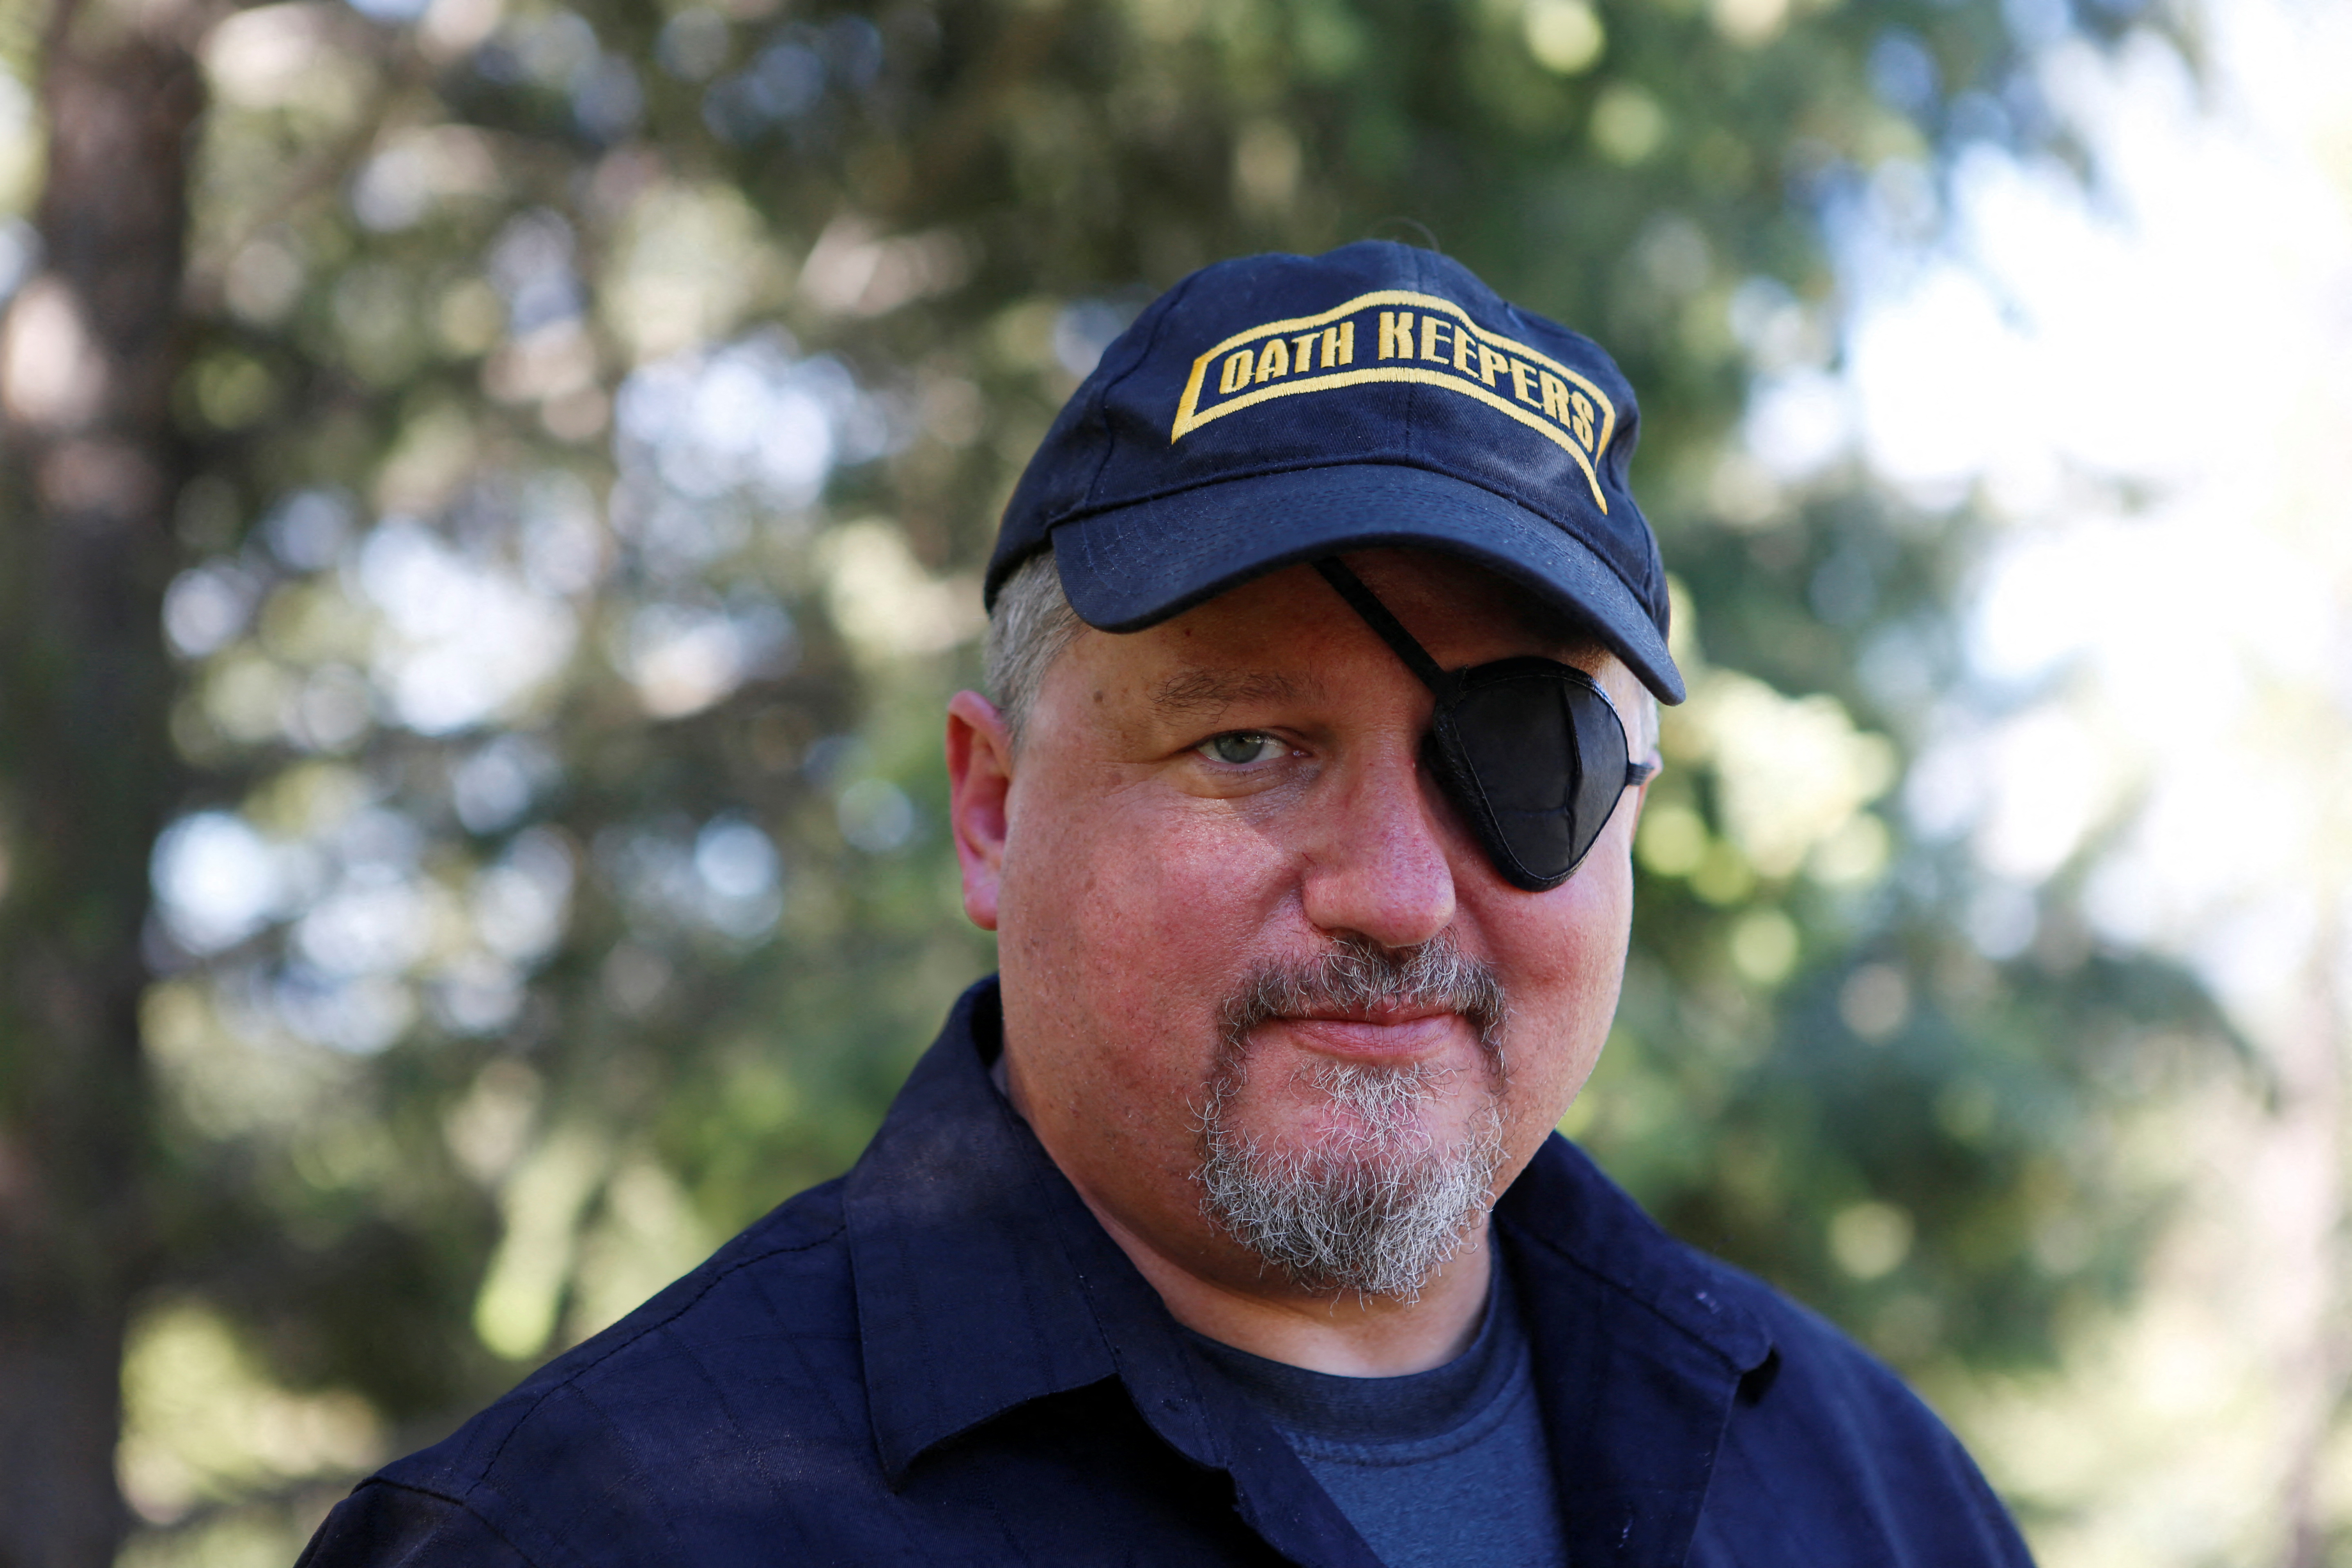 Oath Keepers militia founder Stewart Rhodes poses during an interview session in Eureka, Montana, U.S. June 20, 2016. Picture taken June 20, 2016.  REUTERS/Jim Urquhart